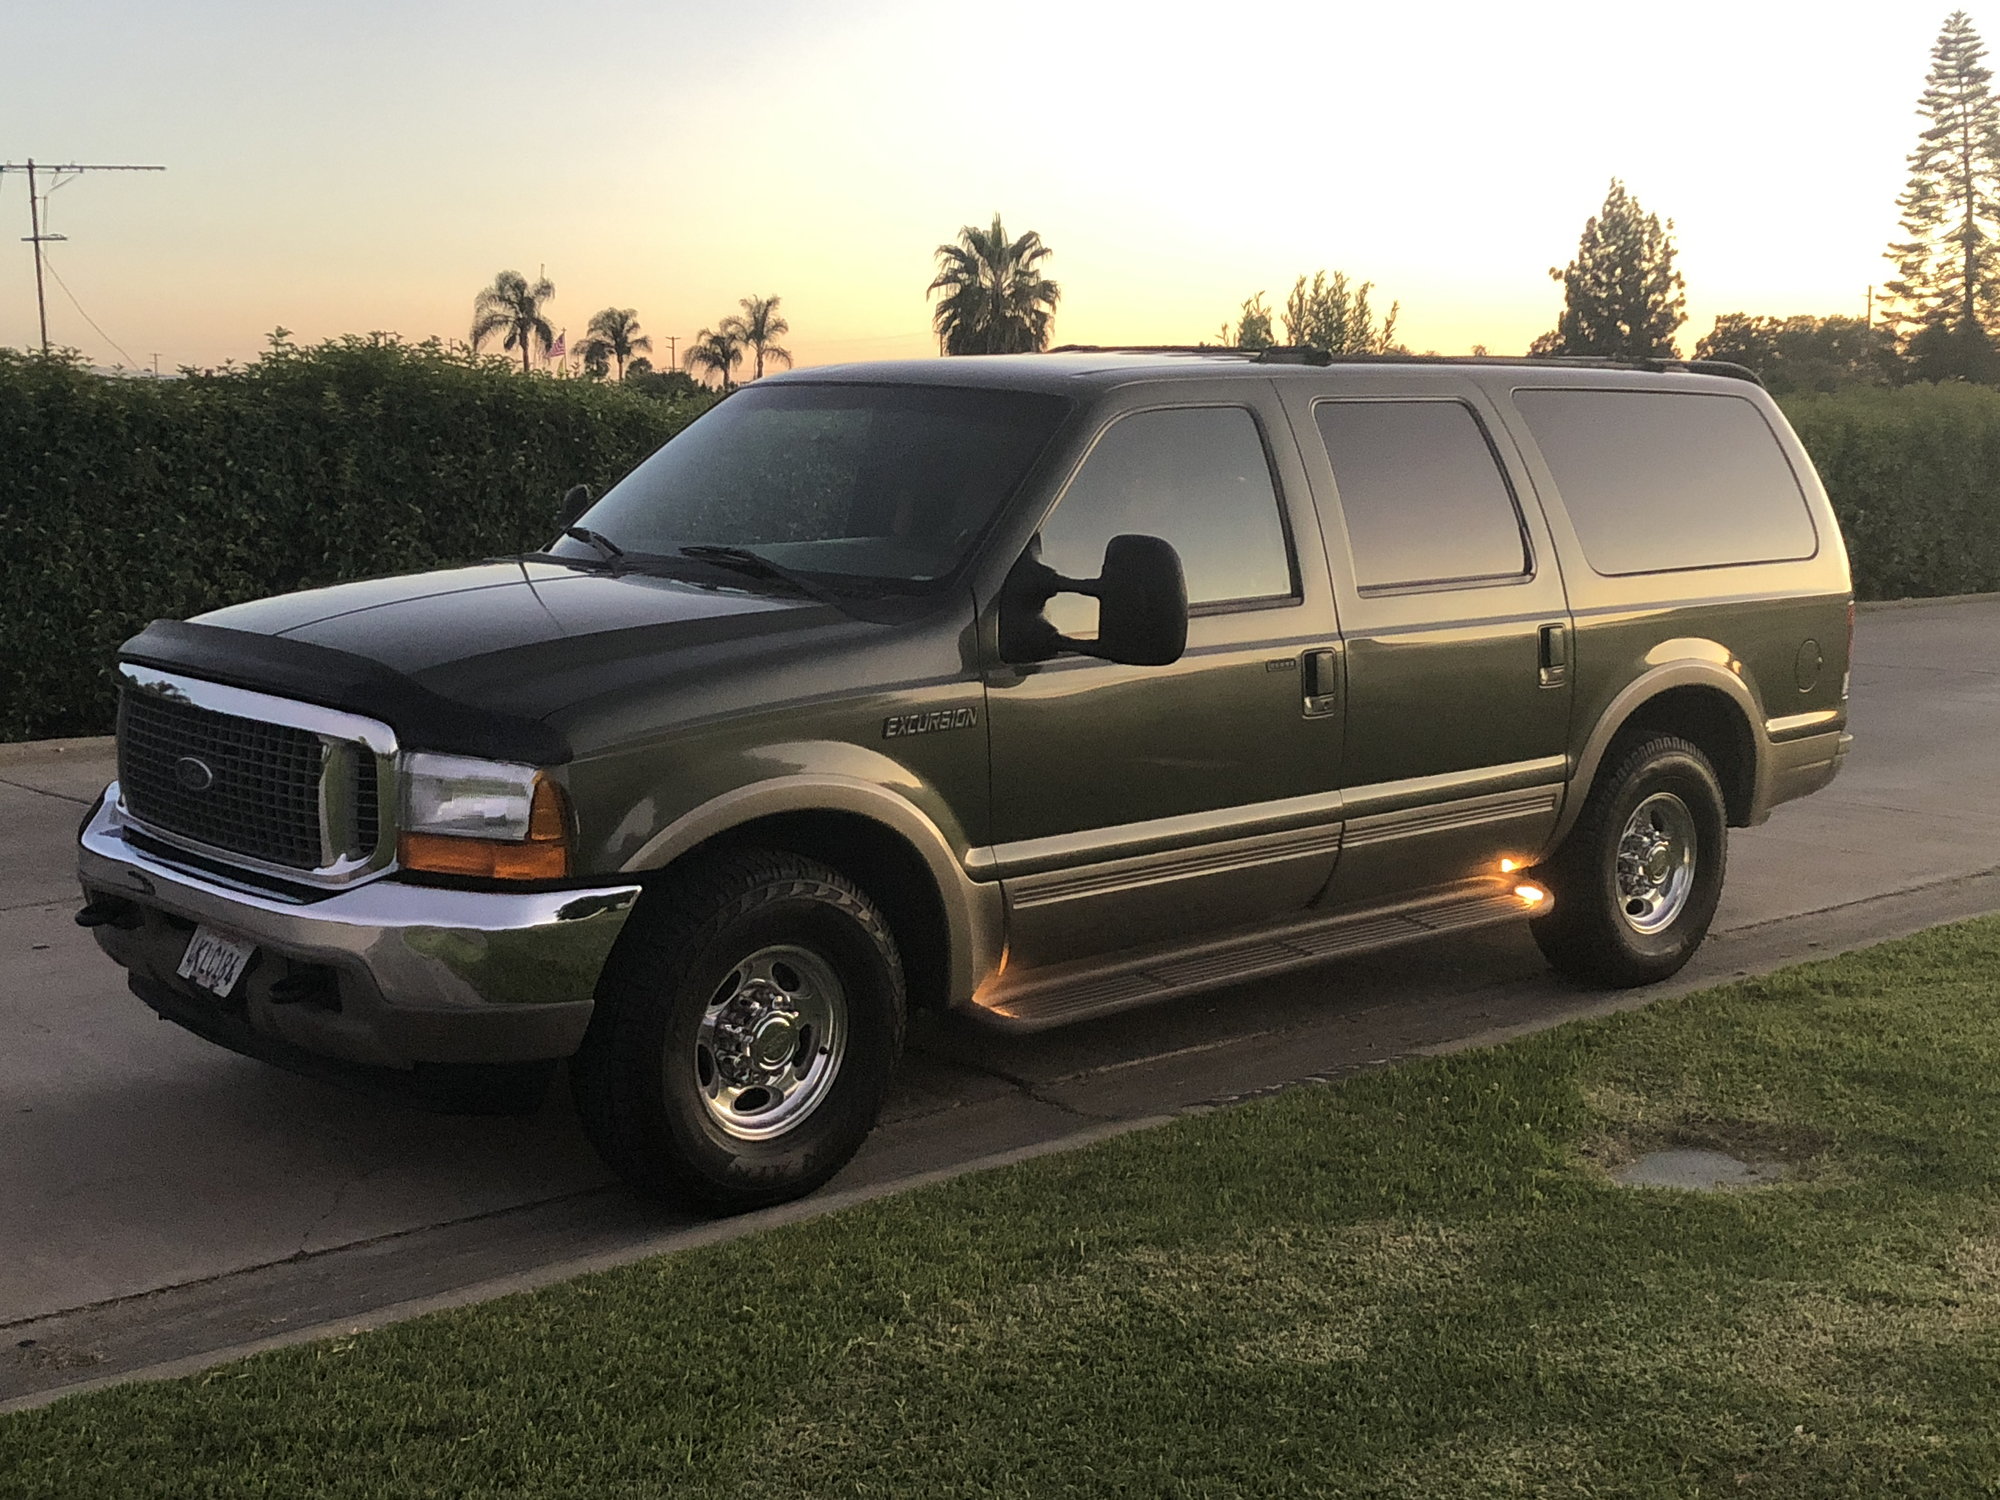 New Owner 2000 Excursion V10 Ford Truck Enthusiasts Forums